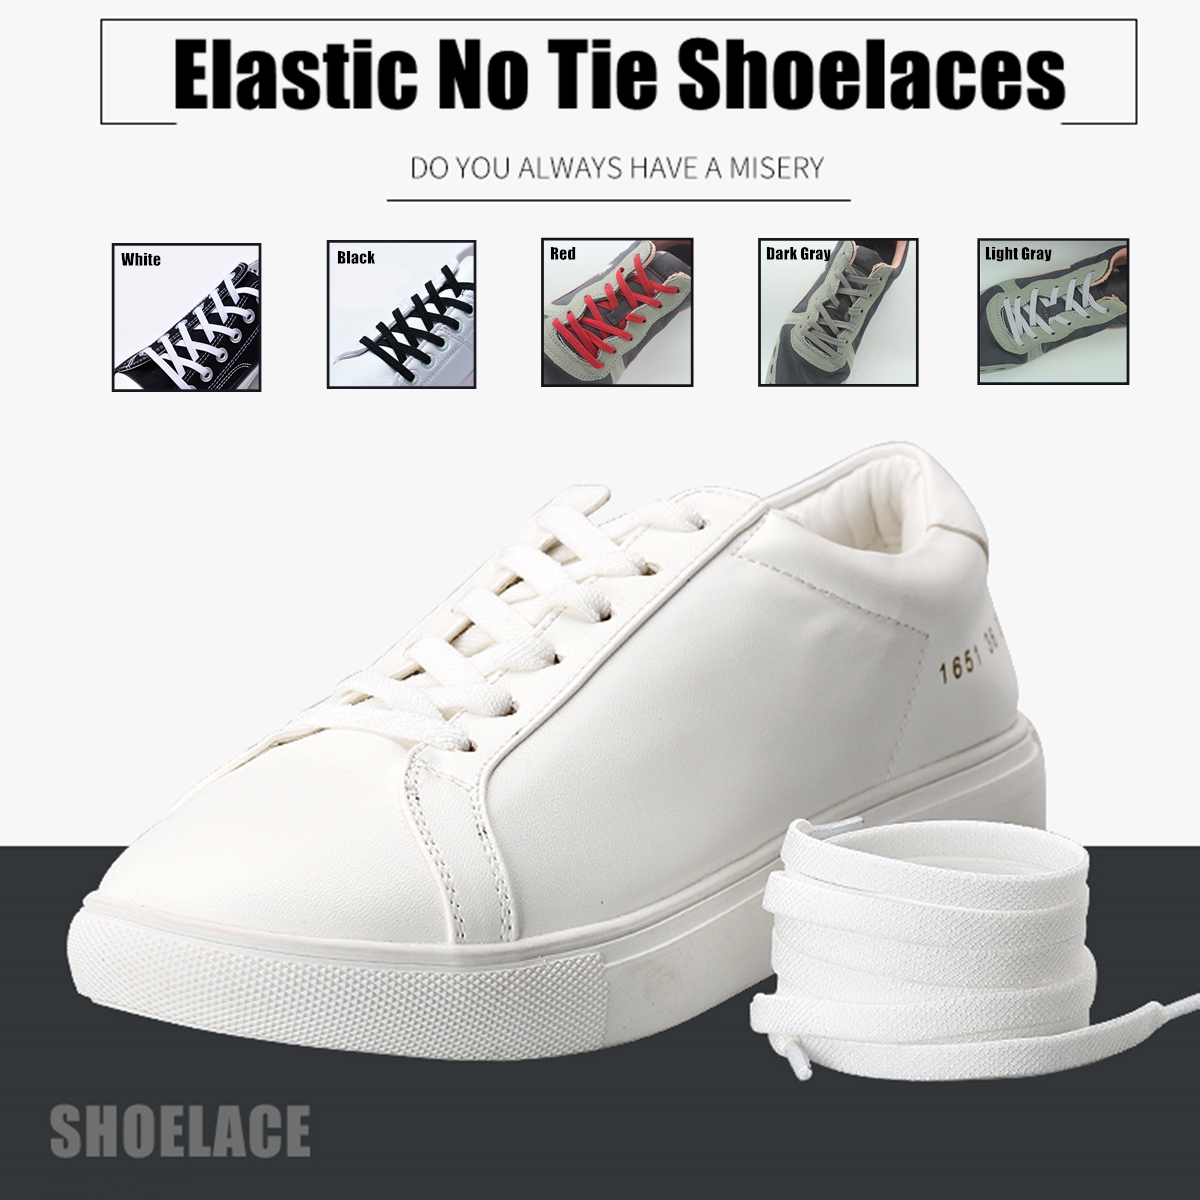 2Pcs-100cm-Elastic-No-Tie-Shoelaces-Lazy-Free-Tie-Sneaker-Laces-With-Buckles-Sports-Running-1470098-6